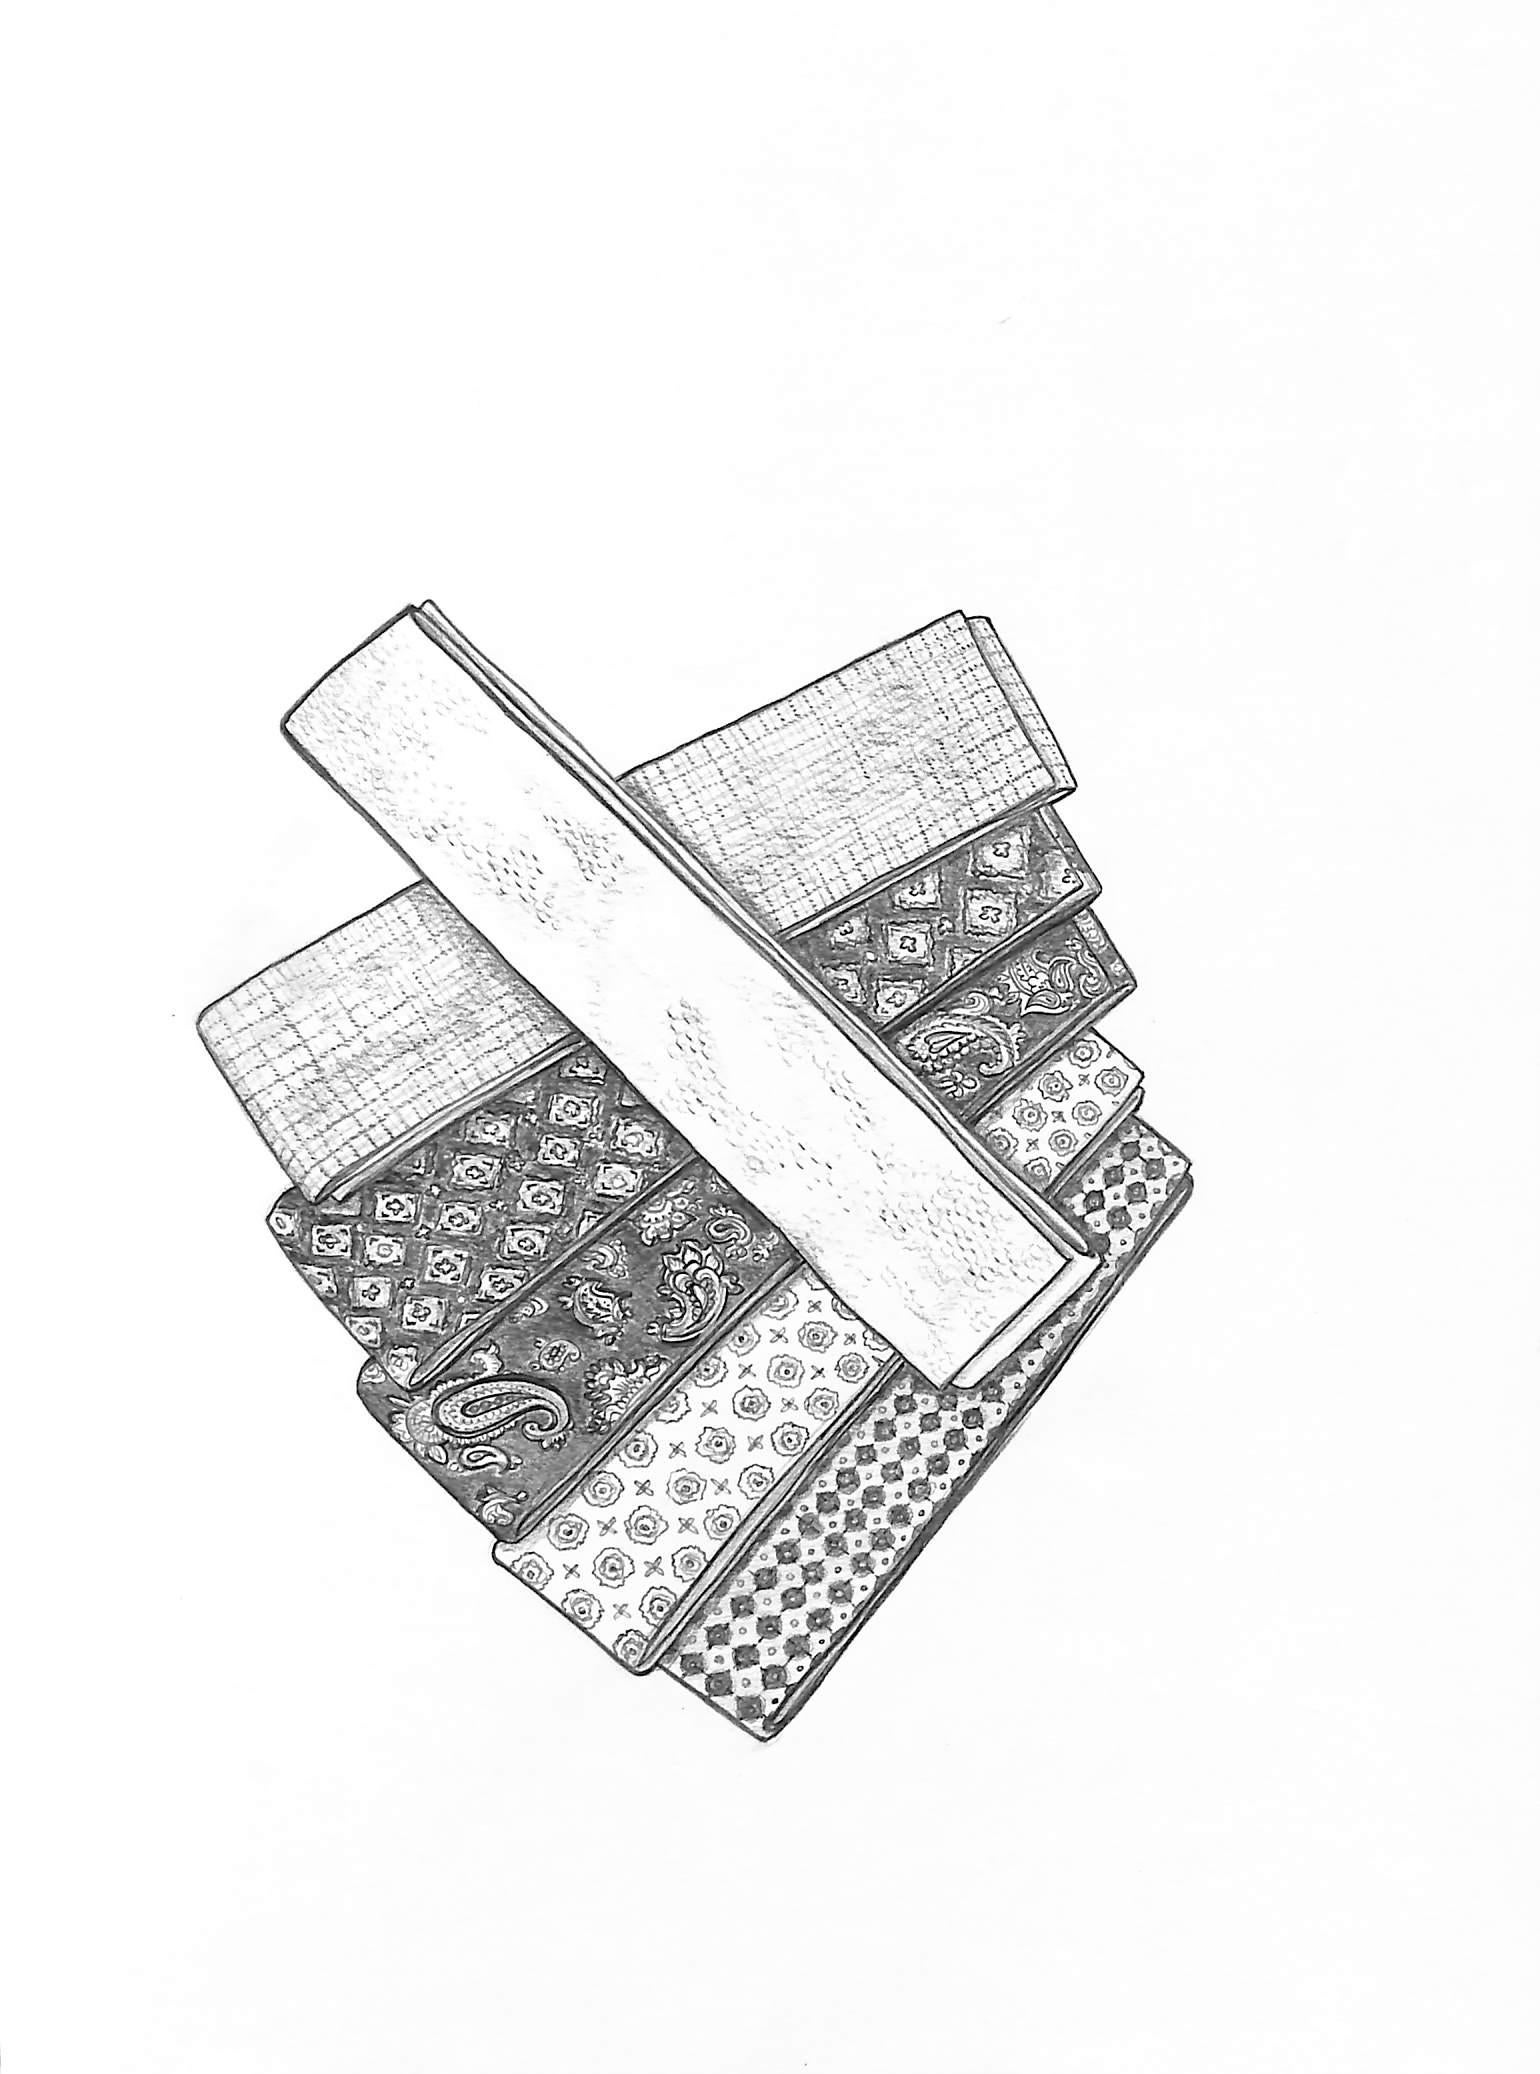 Stock Ties Graphite Drawing - Art by Unknown